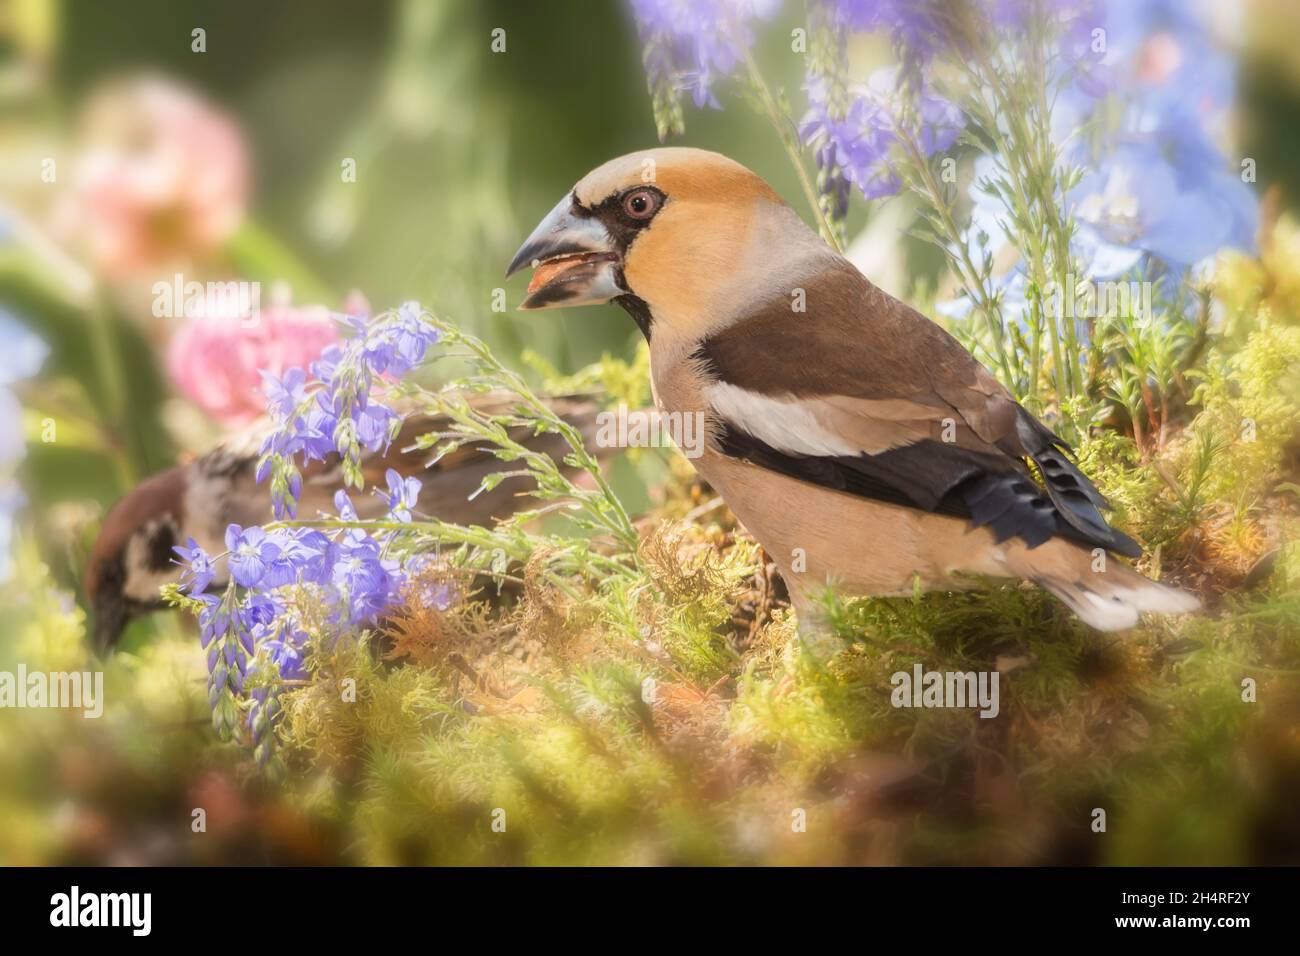 Hawfinch is standing between flowers Stock Photo